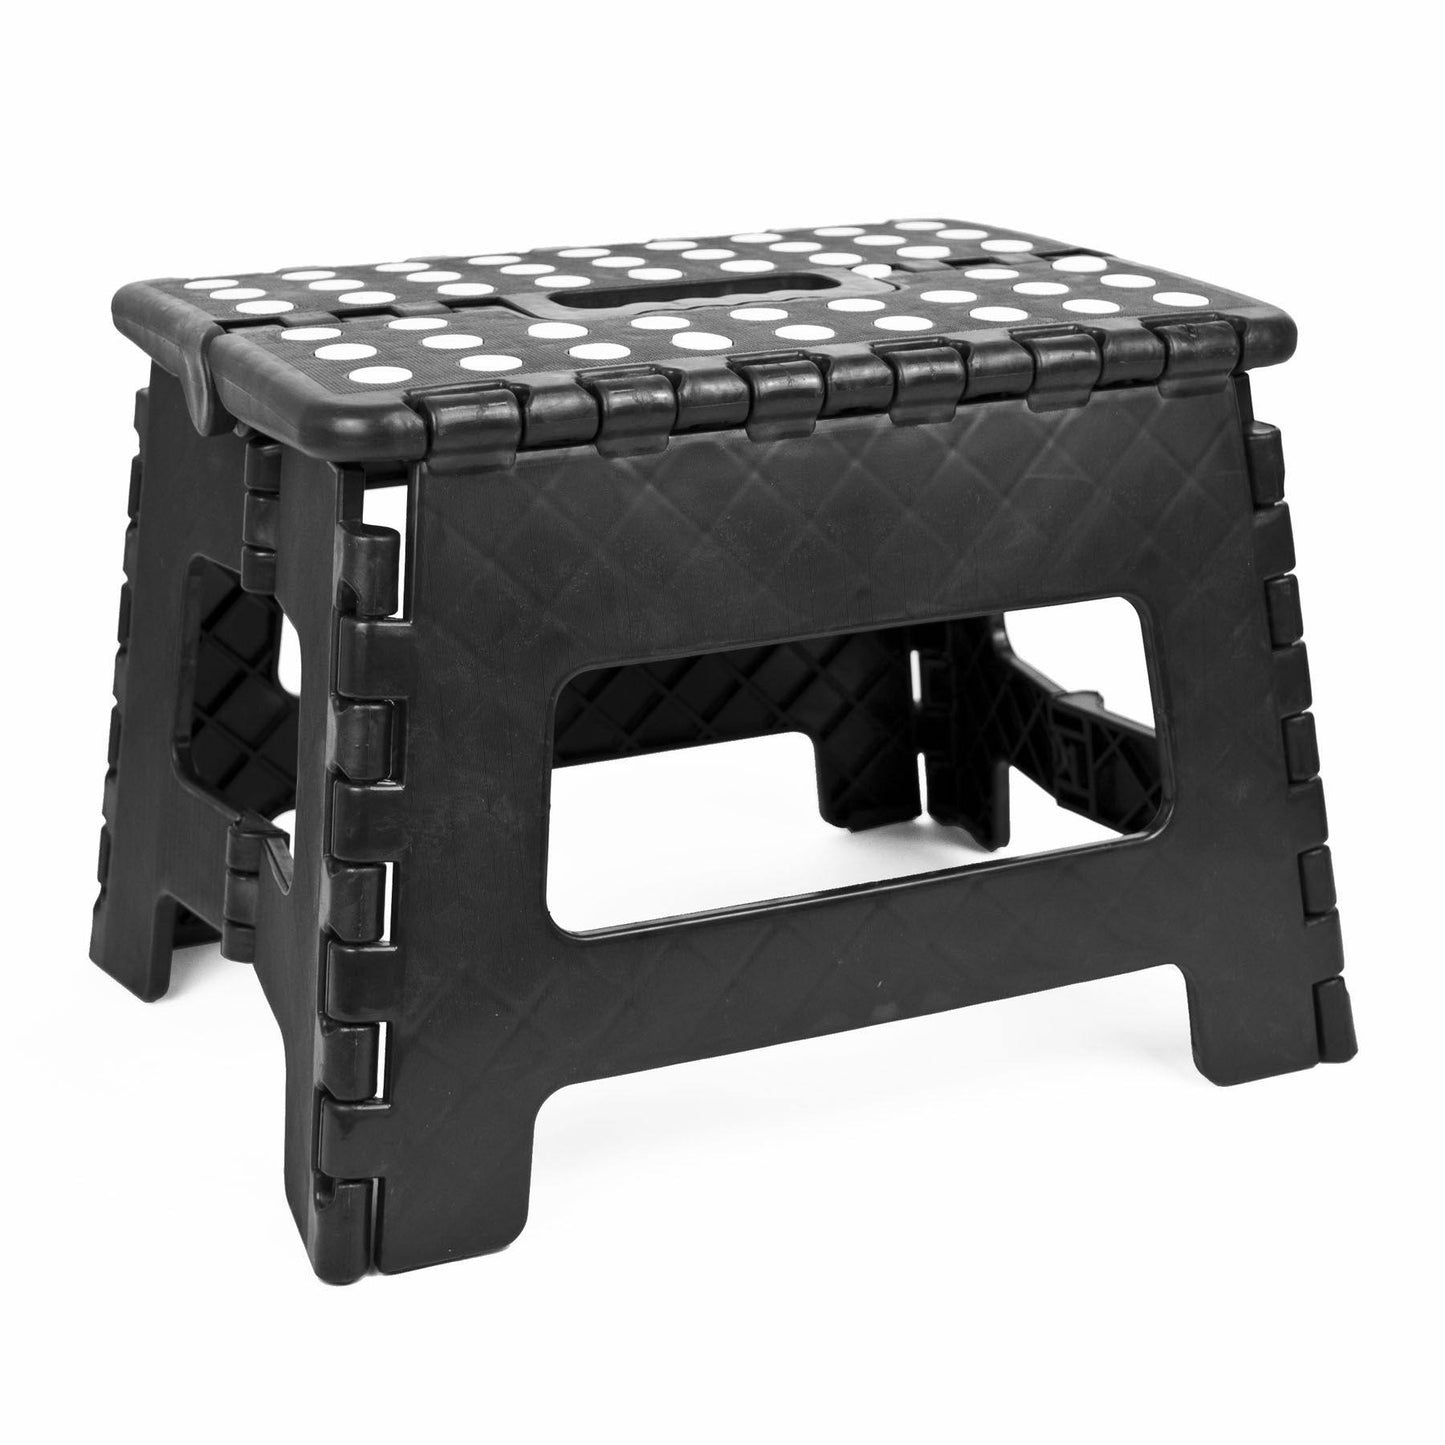 Black Small Folding Step Stool Portable with Handle Heavy Duty - Kporium Home & Garden